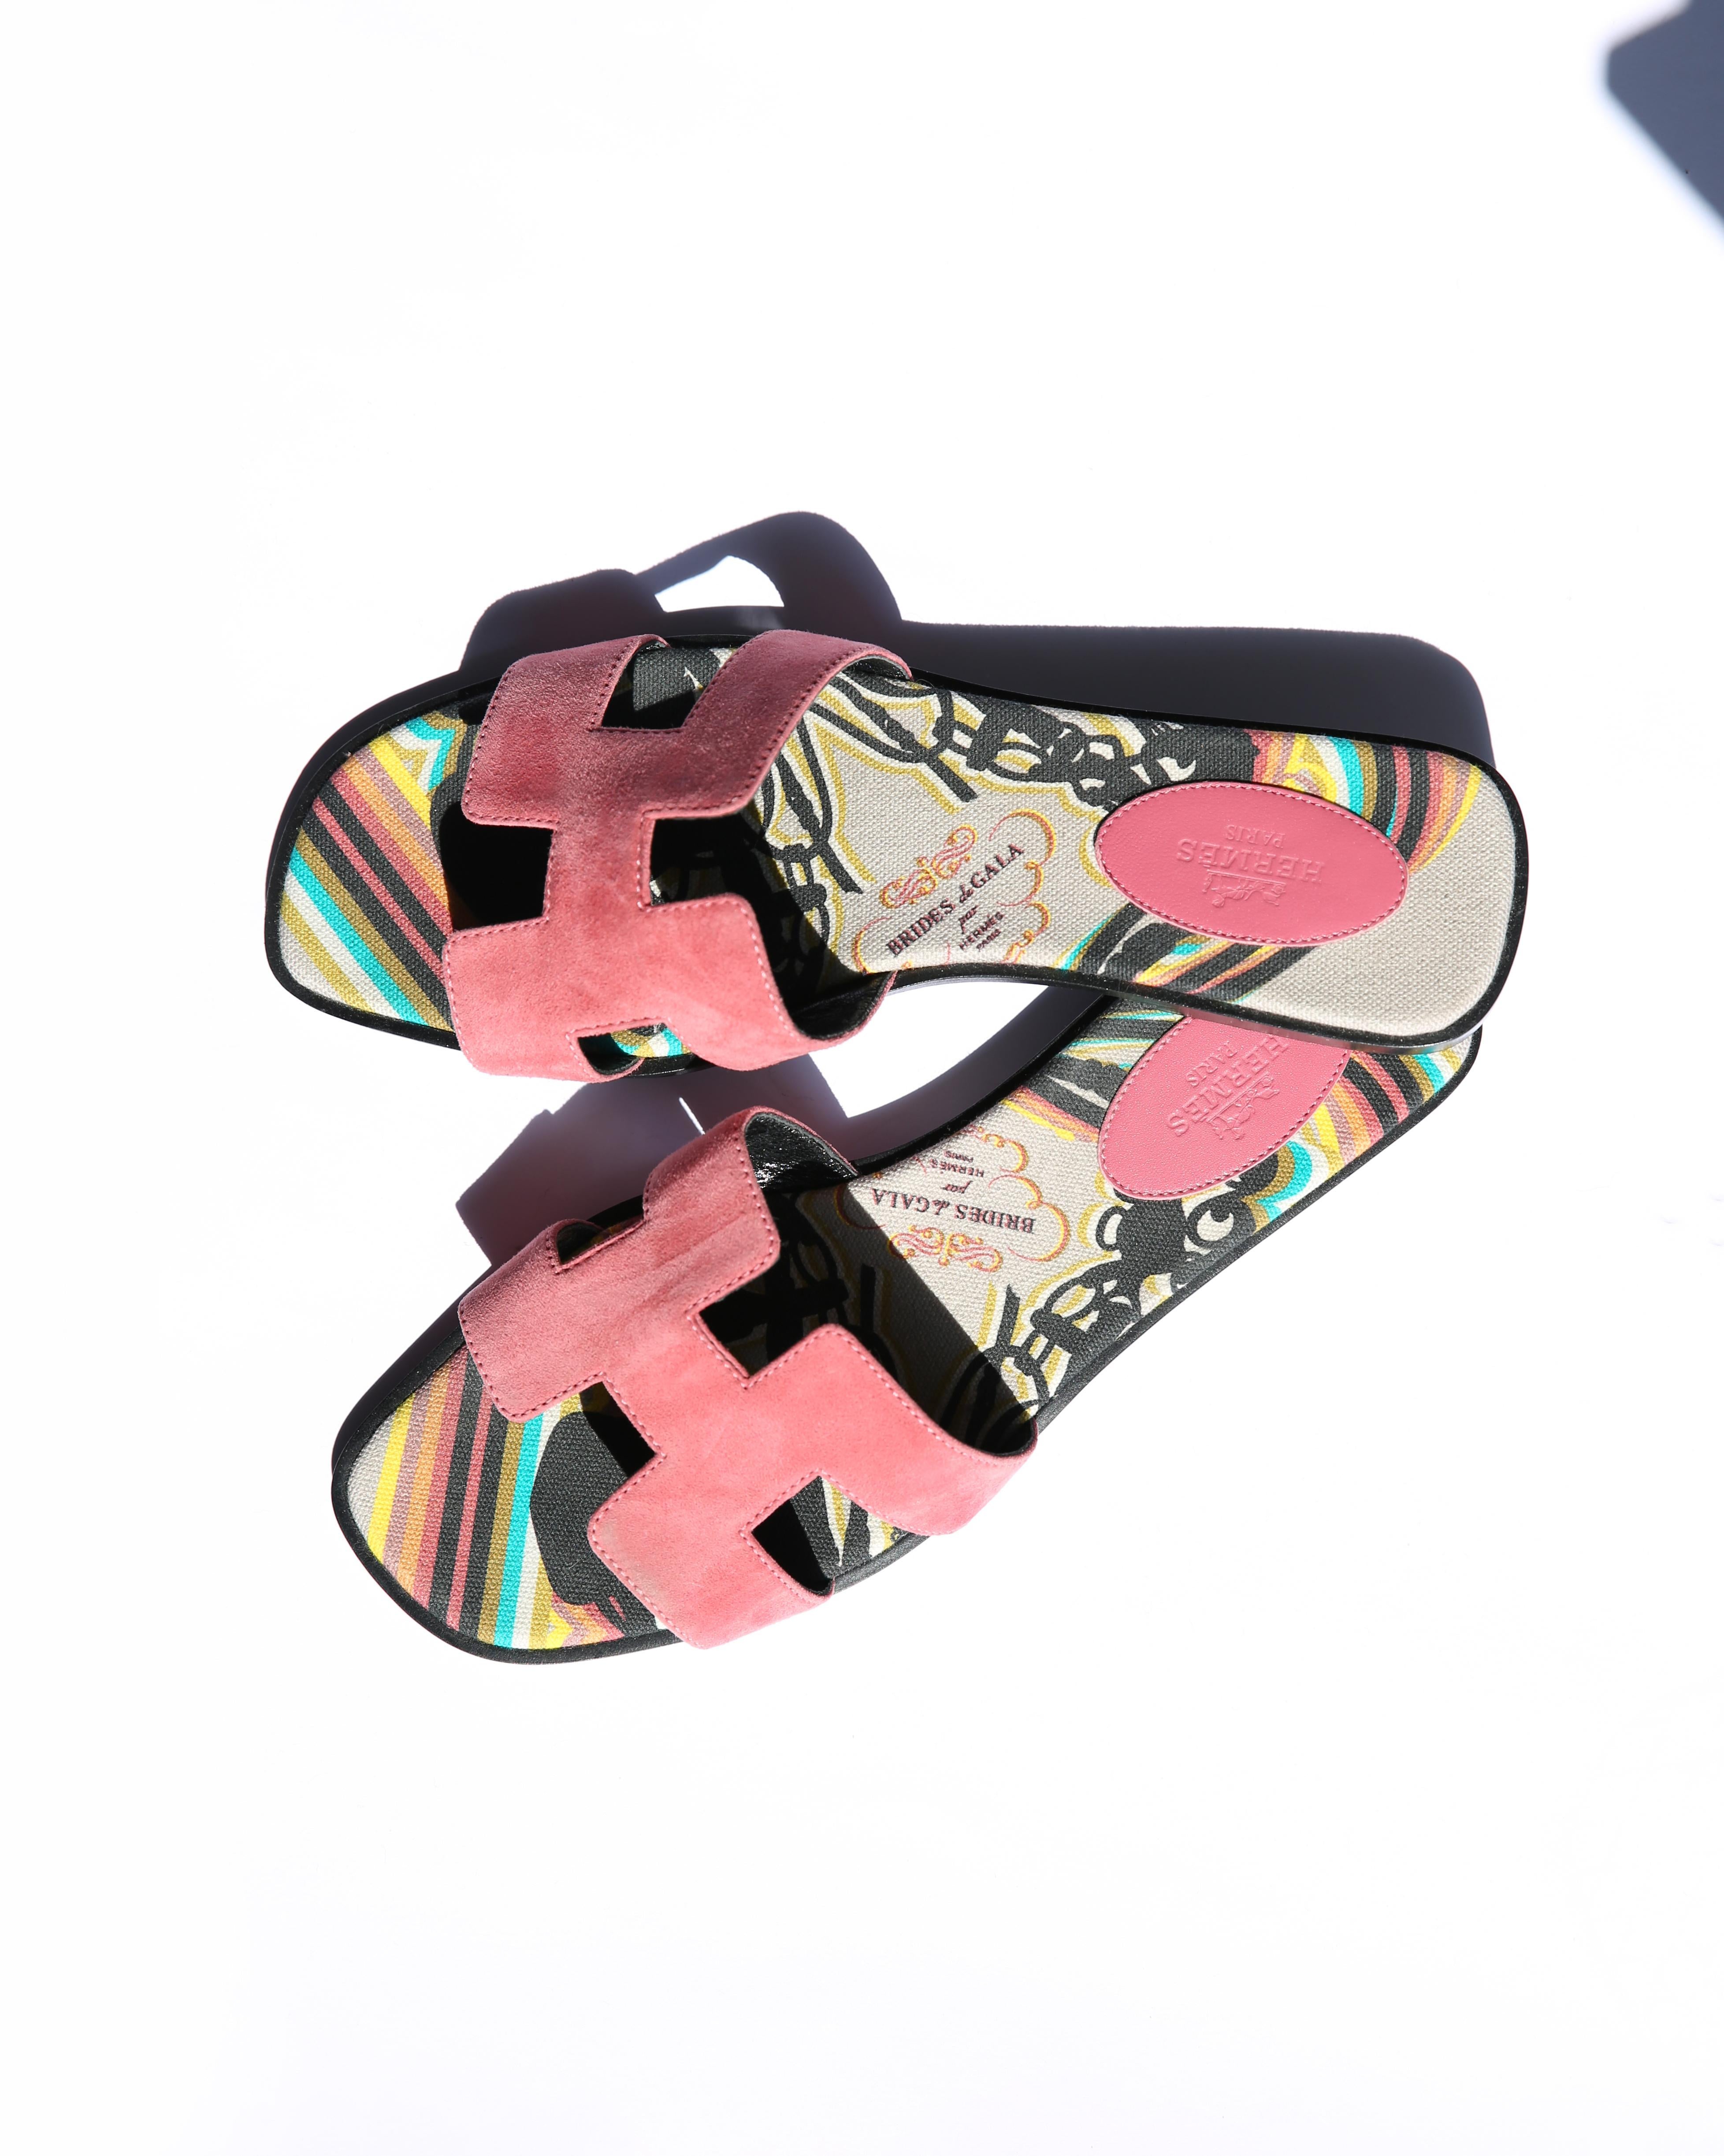 Hermes limited edition Oran sandals in 'Rose de Venise' pink suede
Fabric lined sole in brightly coloured Brides de Gala print 
Black wood heel with leather sole 

Size:
EU 39
US 9
UK 6

Condition: 
In excellent condition. Minor wear to the soles,